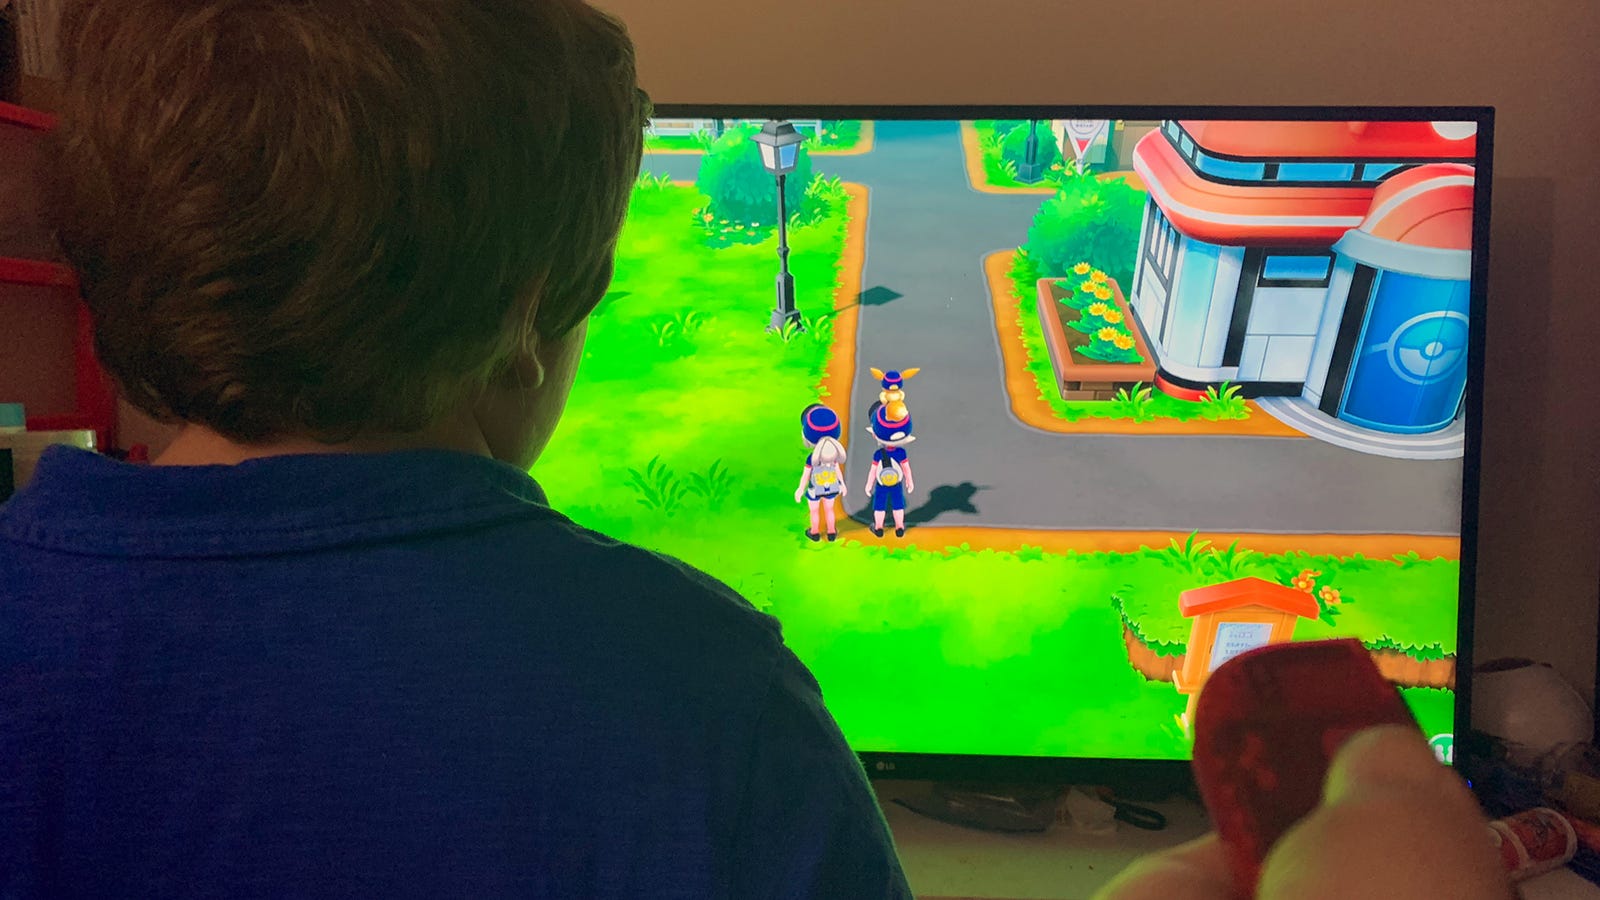 Pokémon Let's Go Helped Me Connect With My Son